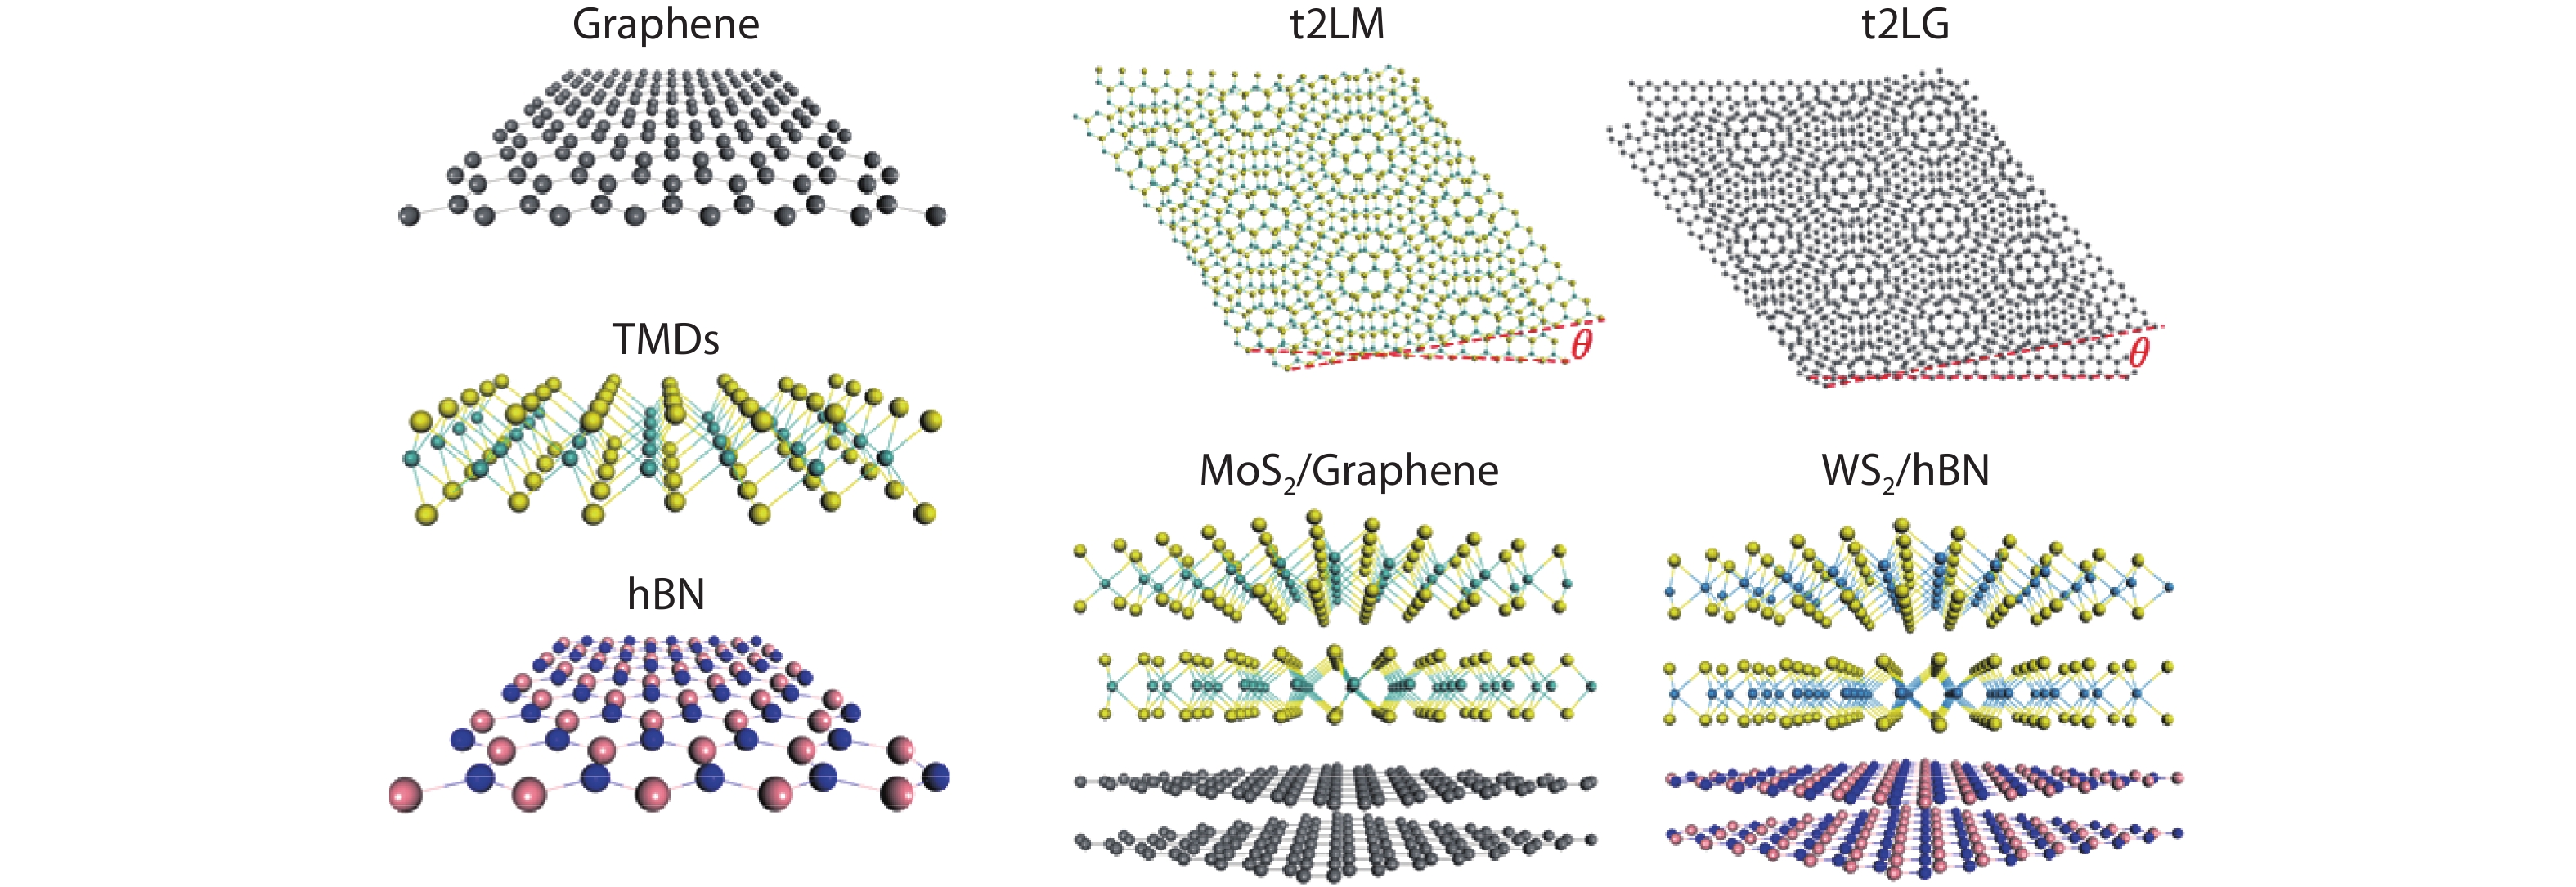 (Color online) Structure of several 2DMs (graphene, TMDs and hBN) and related vdWHs, such as twisted bilayer MoSand twisted bilayer graphene with twisted angle , MoS/Graphene and WS/hBN heterostructure.